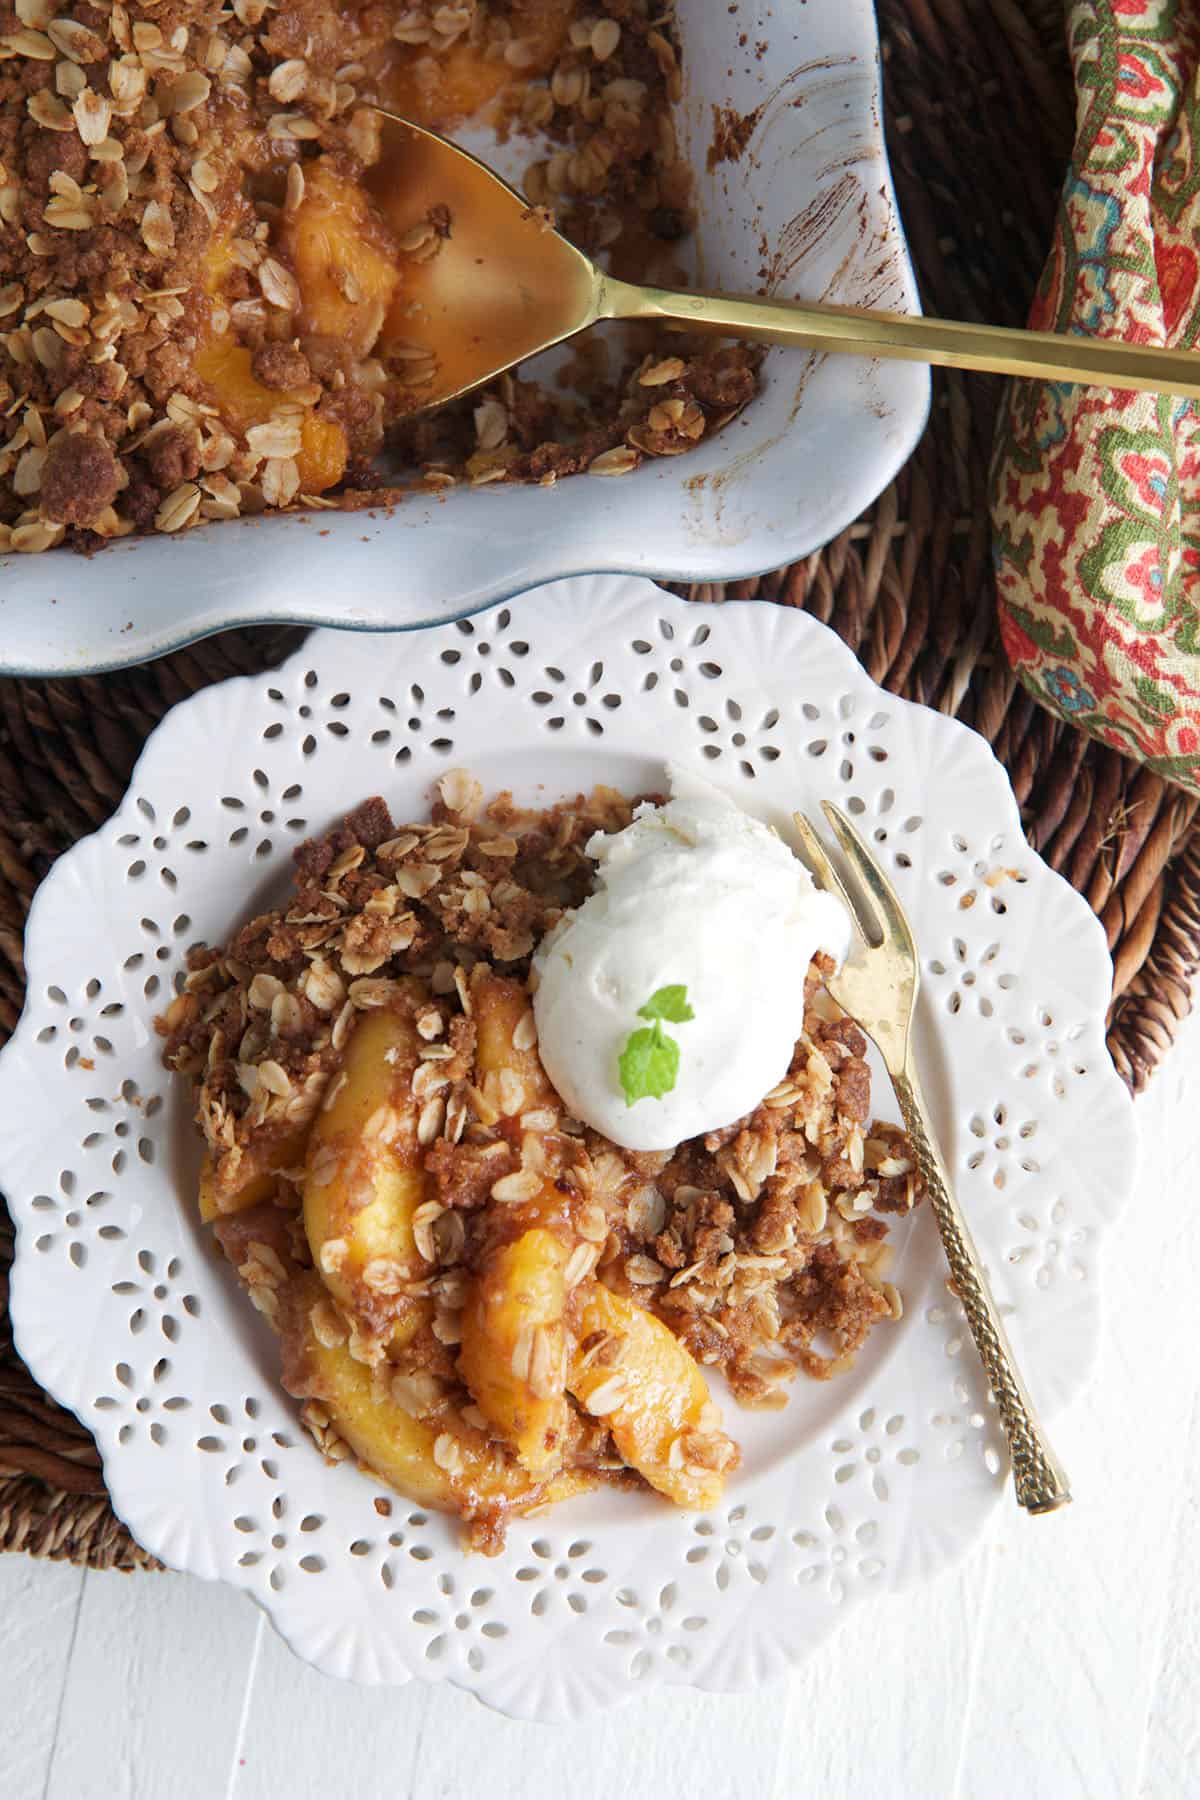 A scoop of vanilla ice cream is placed on top of the peach crisp. 